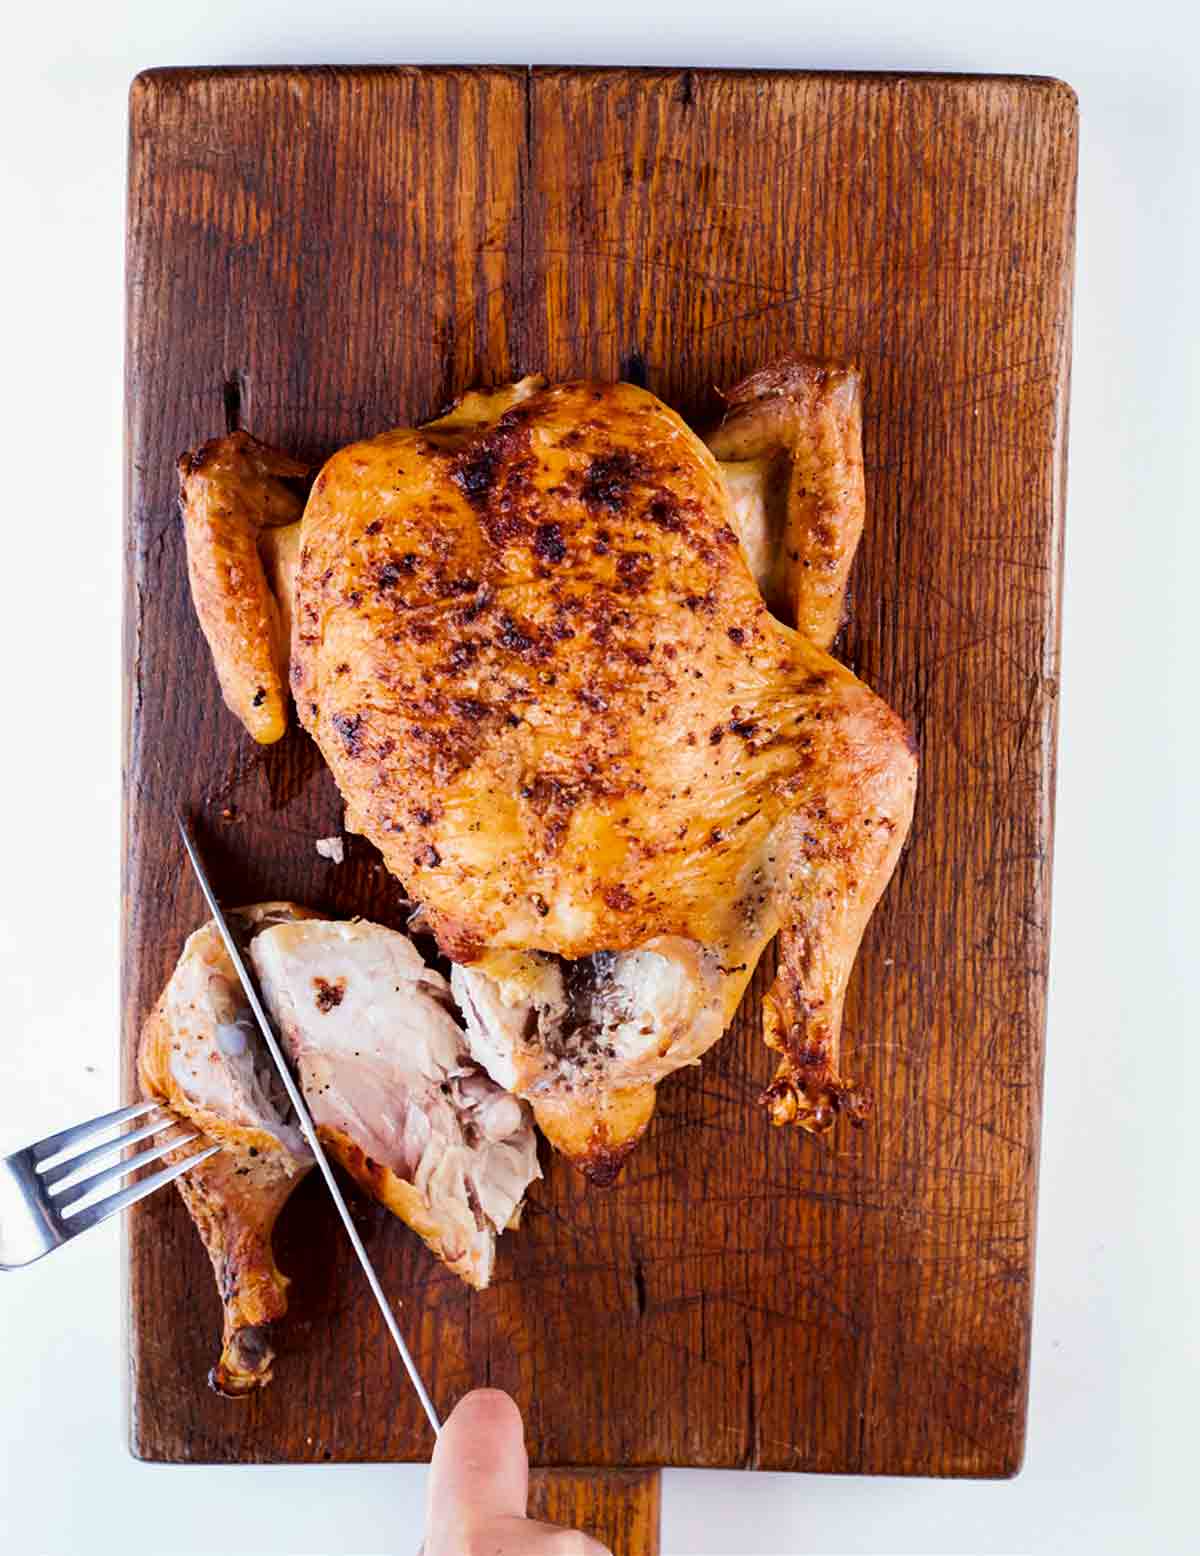 A person carving a roast chicken on a cutting board.